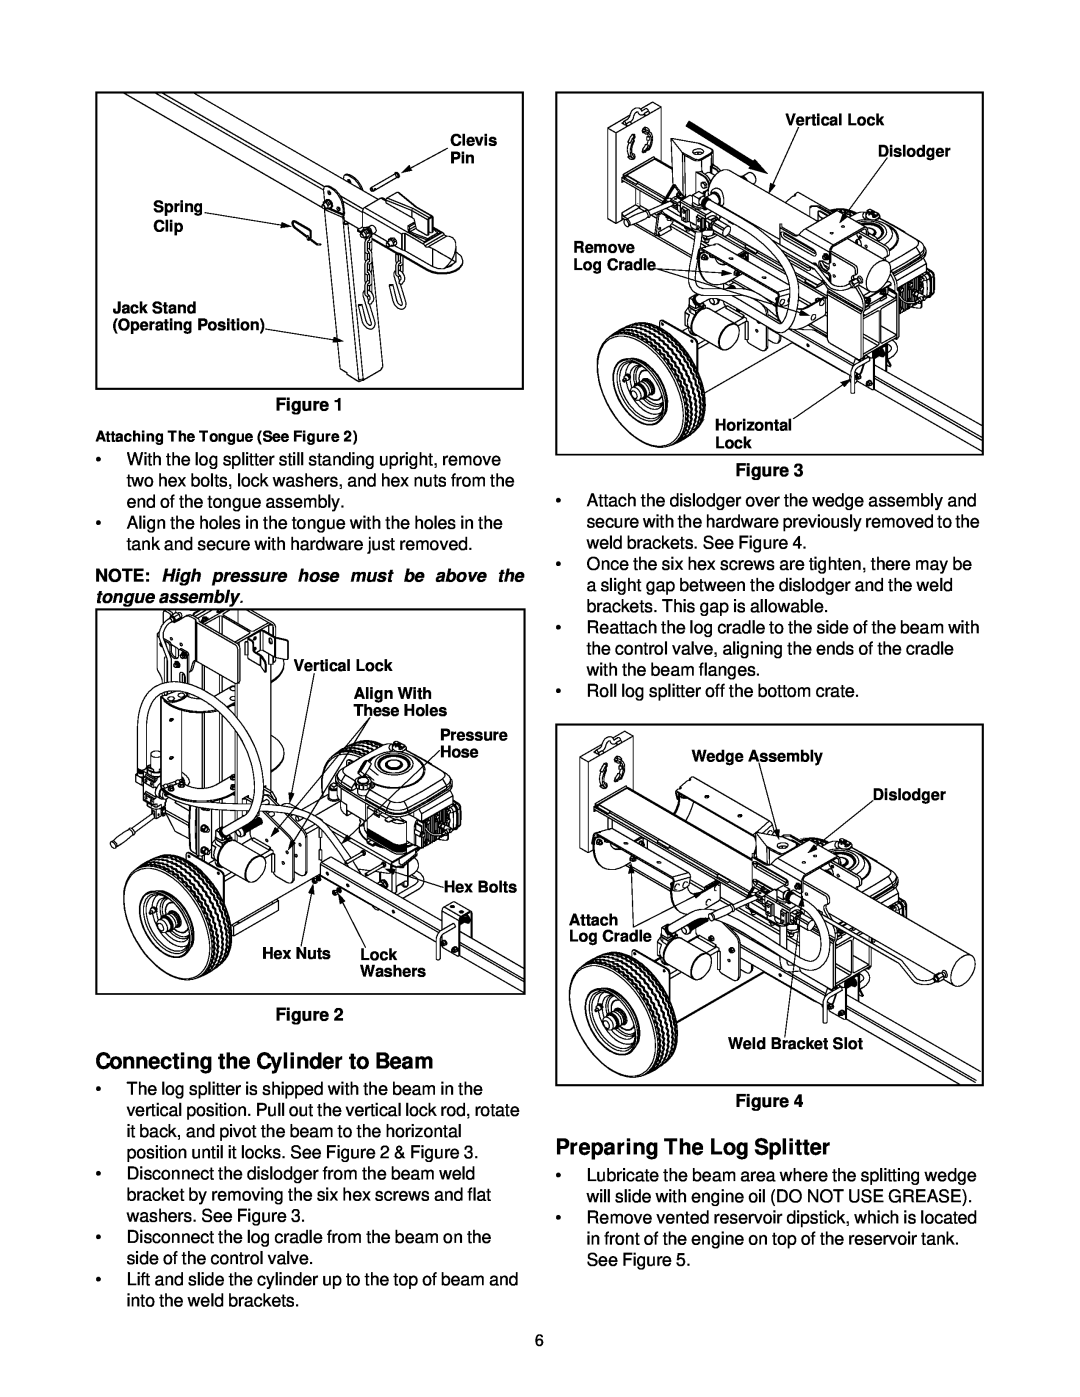 MTD 500 thru 510 manual Connecting the Cylinder to Beam, Preparing The Log Splitter, Attaching The Tongue See Figure 